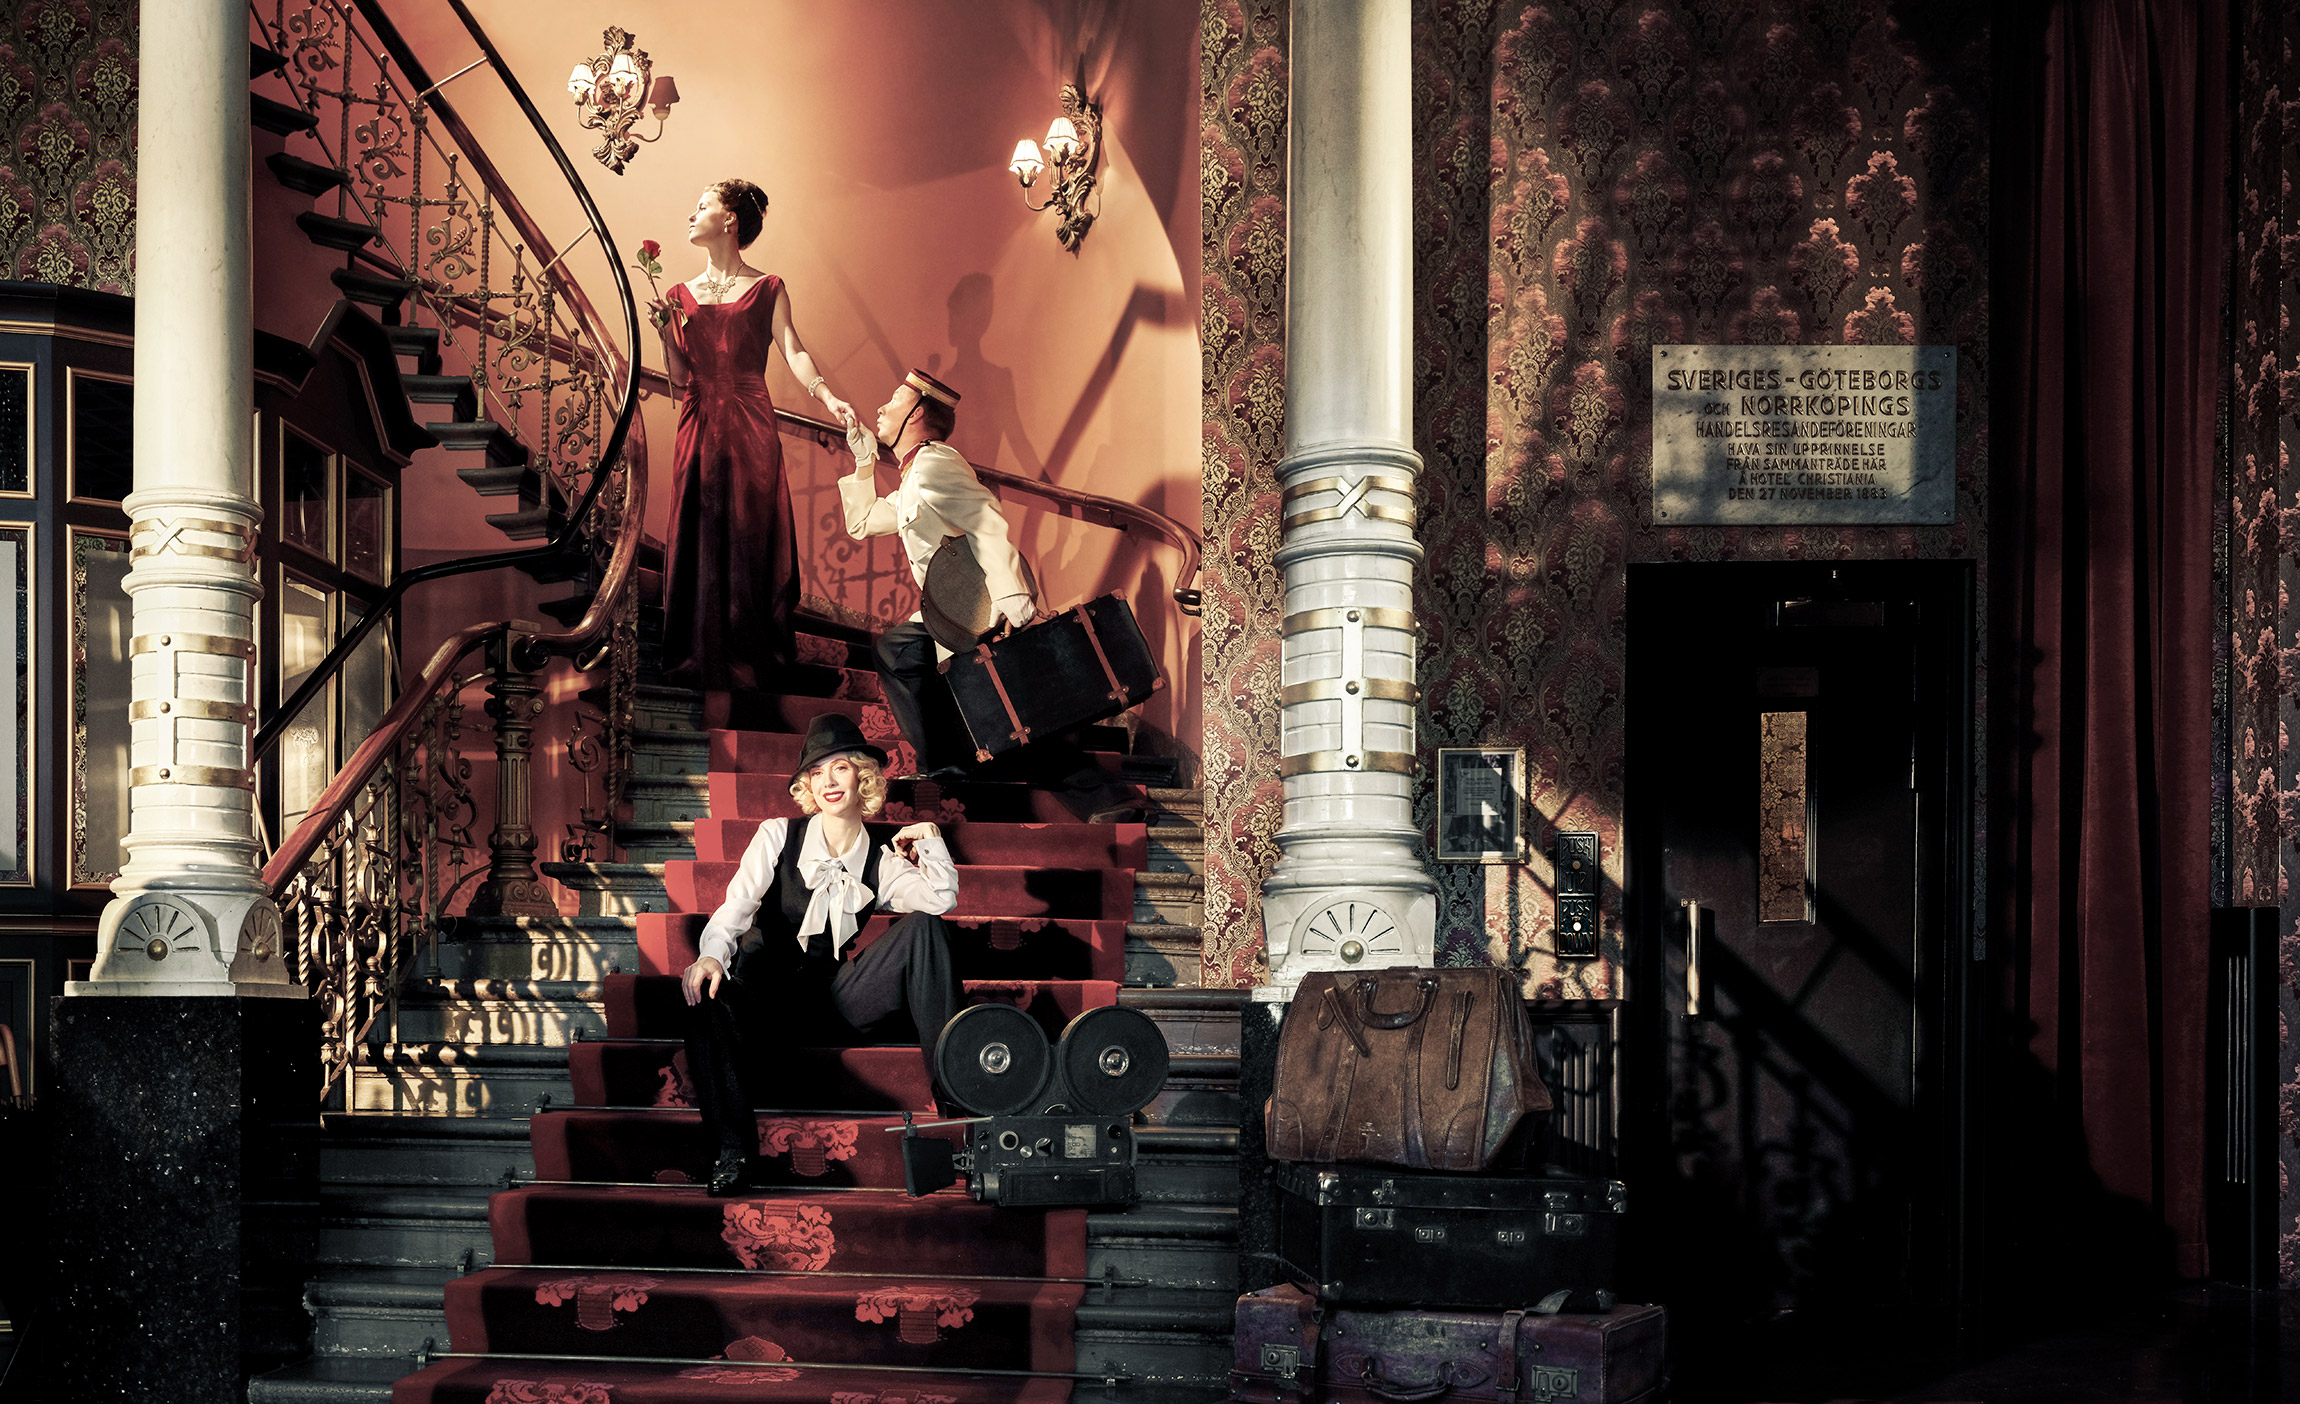 An indoor scene from the early 1900s featuring two individuals dressed in period-appropriate clothing. One person is seated at the foot of an elegant staircase, clutching an umbrella, while the other stands higher up on the stairs with luggage near them. Vintage suitcases are scattered around the area, and the walls are festooned with floral patterns and artwork. The scene gives the impression of a hotel reception with rich history.